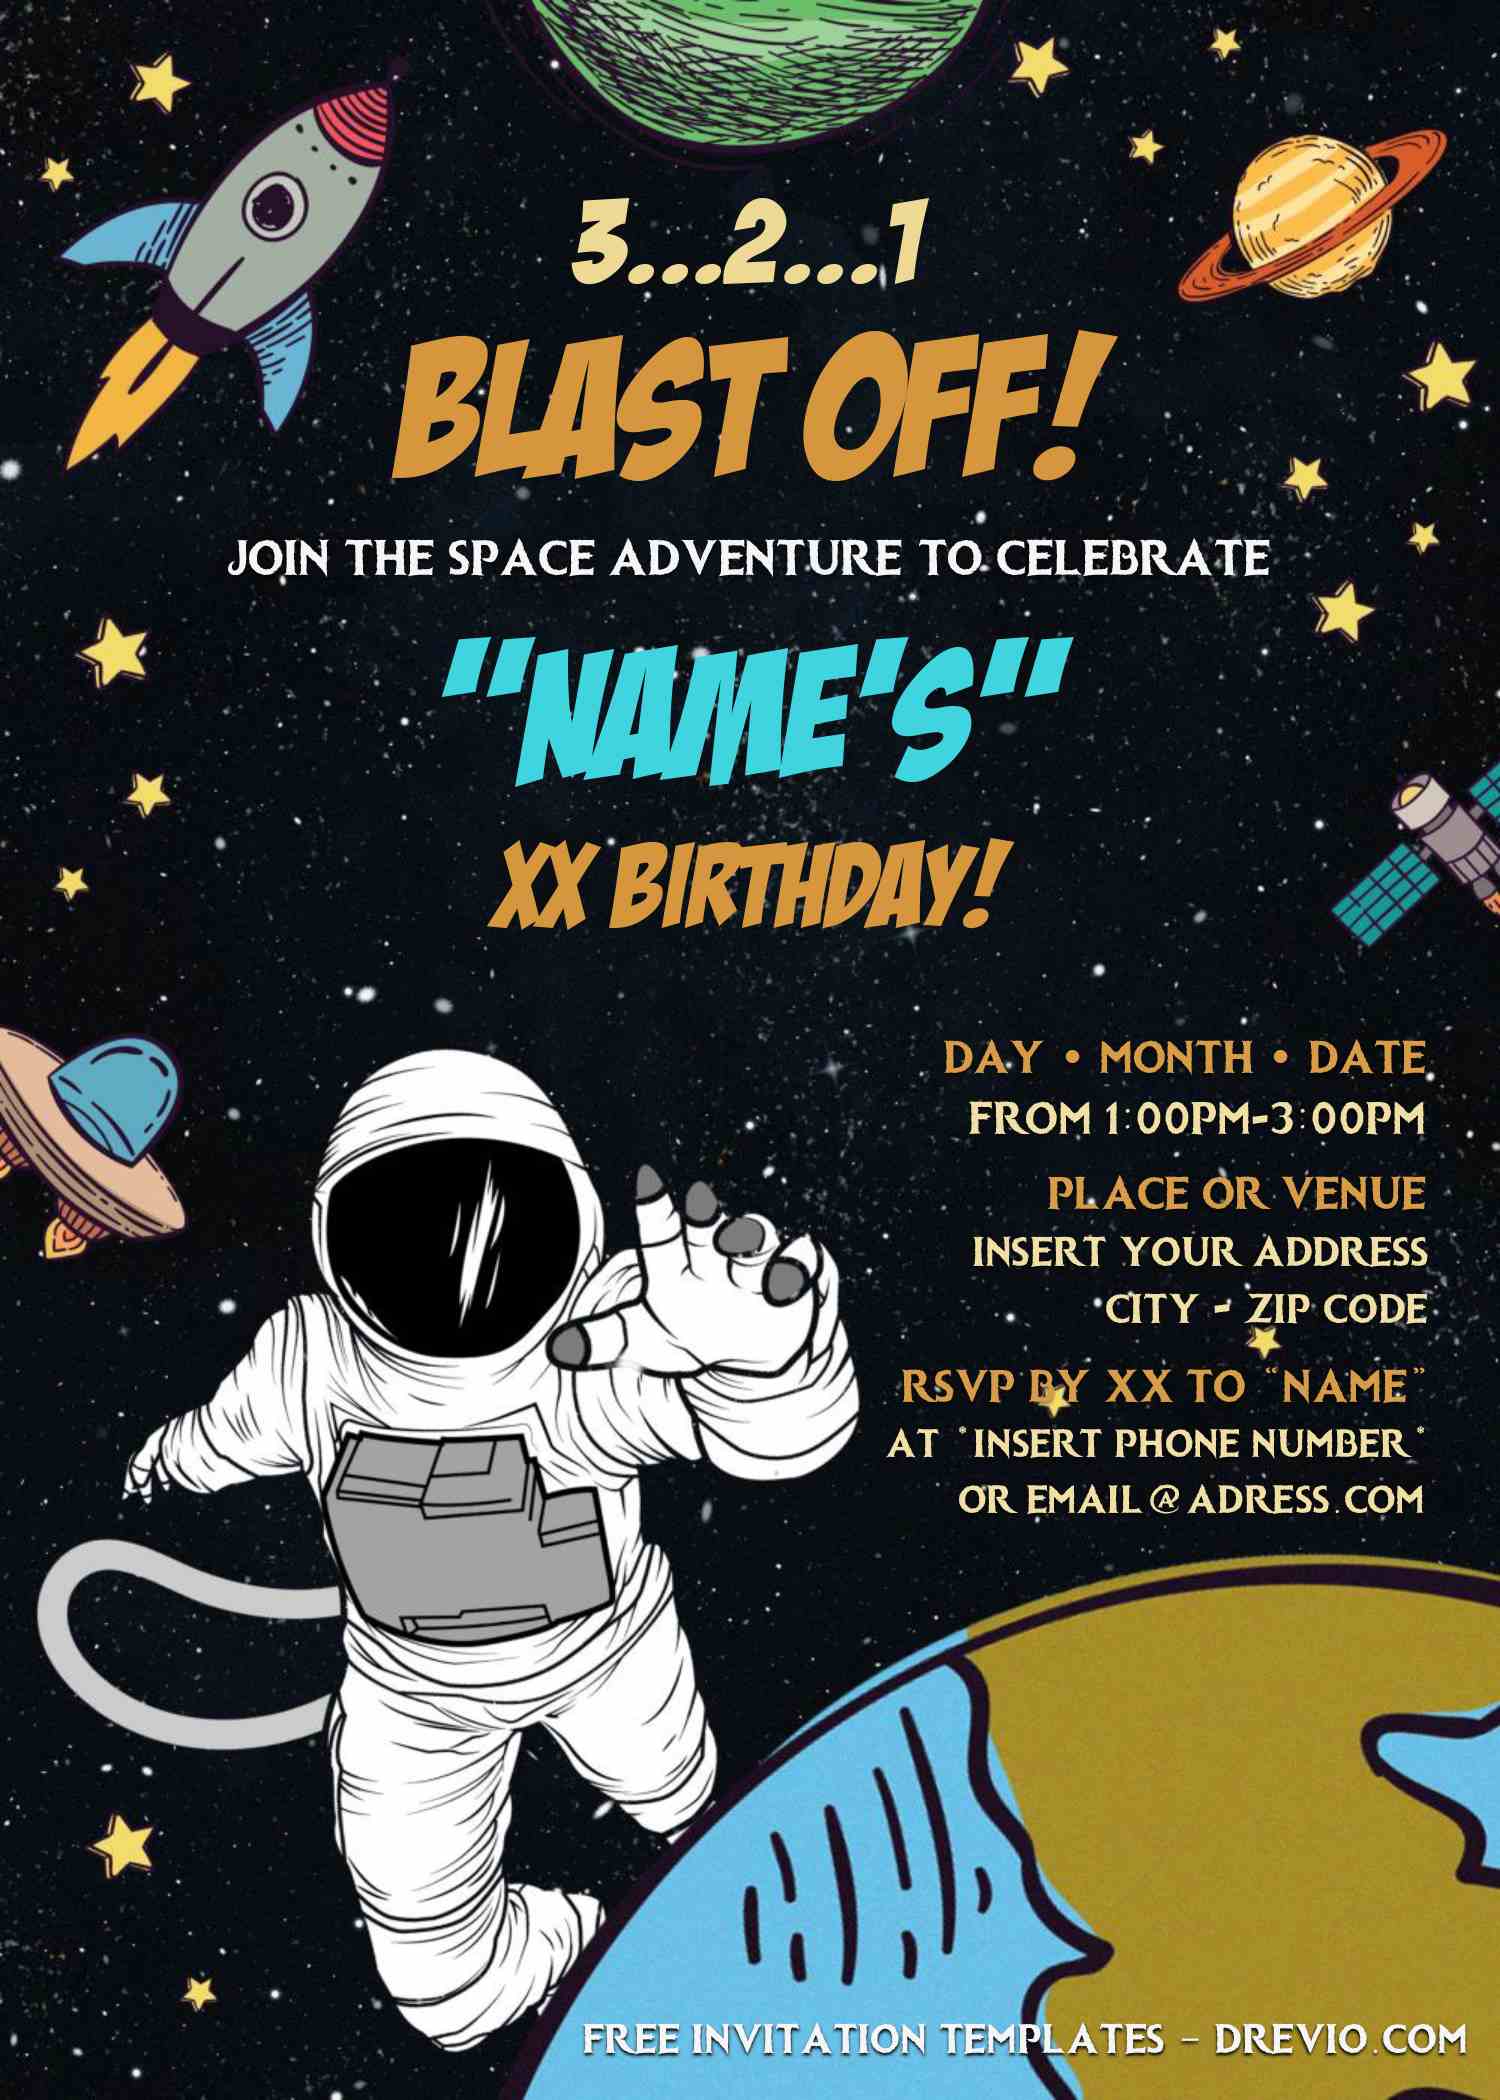 Free Astronaut Birthday Invitation Templates For Word Download Hundreds Free Printable Birthday Invitation Templates